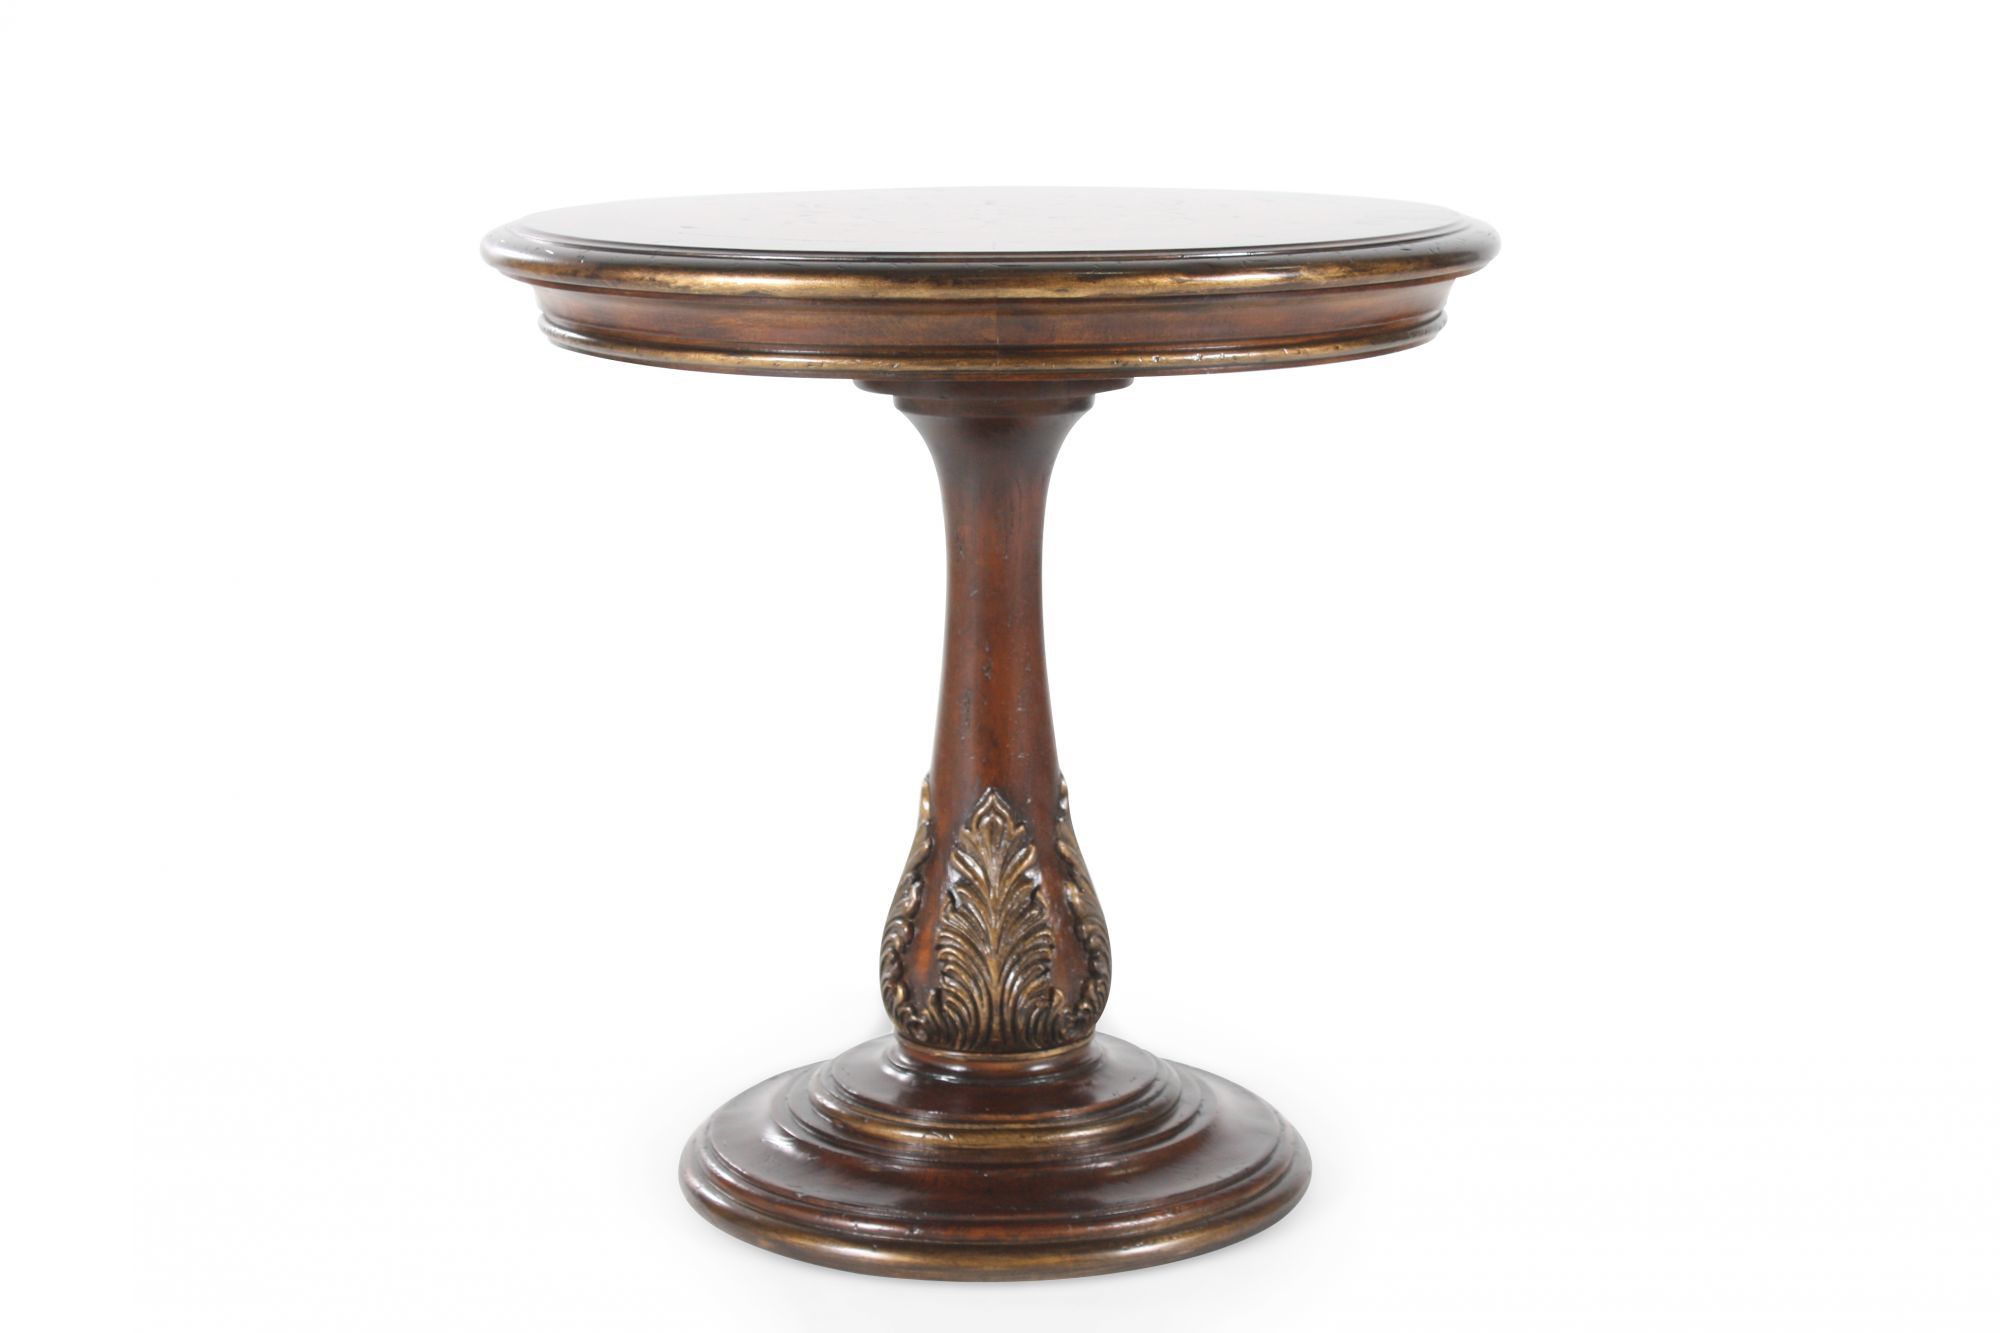 carved traditional round accent table caramel mathis brothers hook bronze ikea bedroom storage ideas patio umbrella lights folding drinks christmas tablecloth and runner narrow